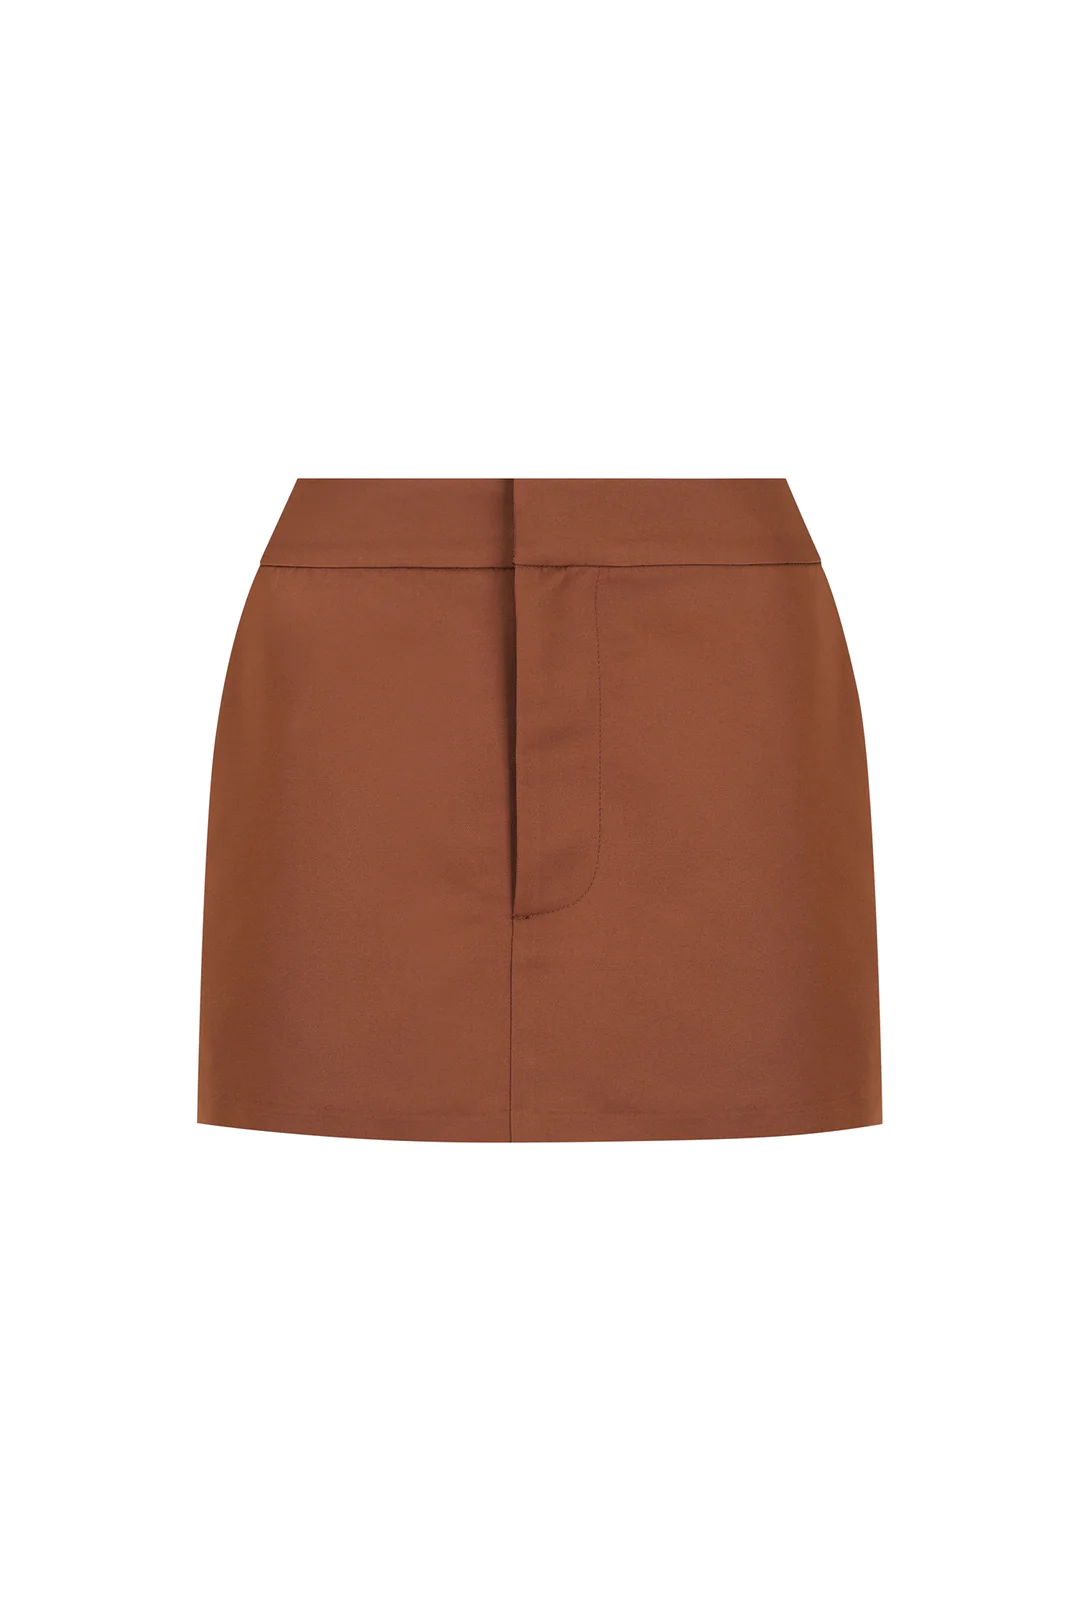 Forrester Suit Skirt // Chocolate